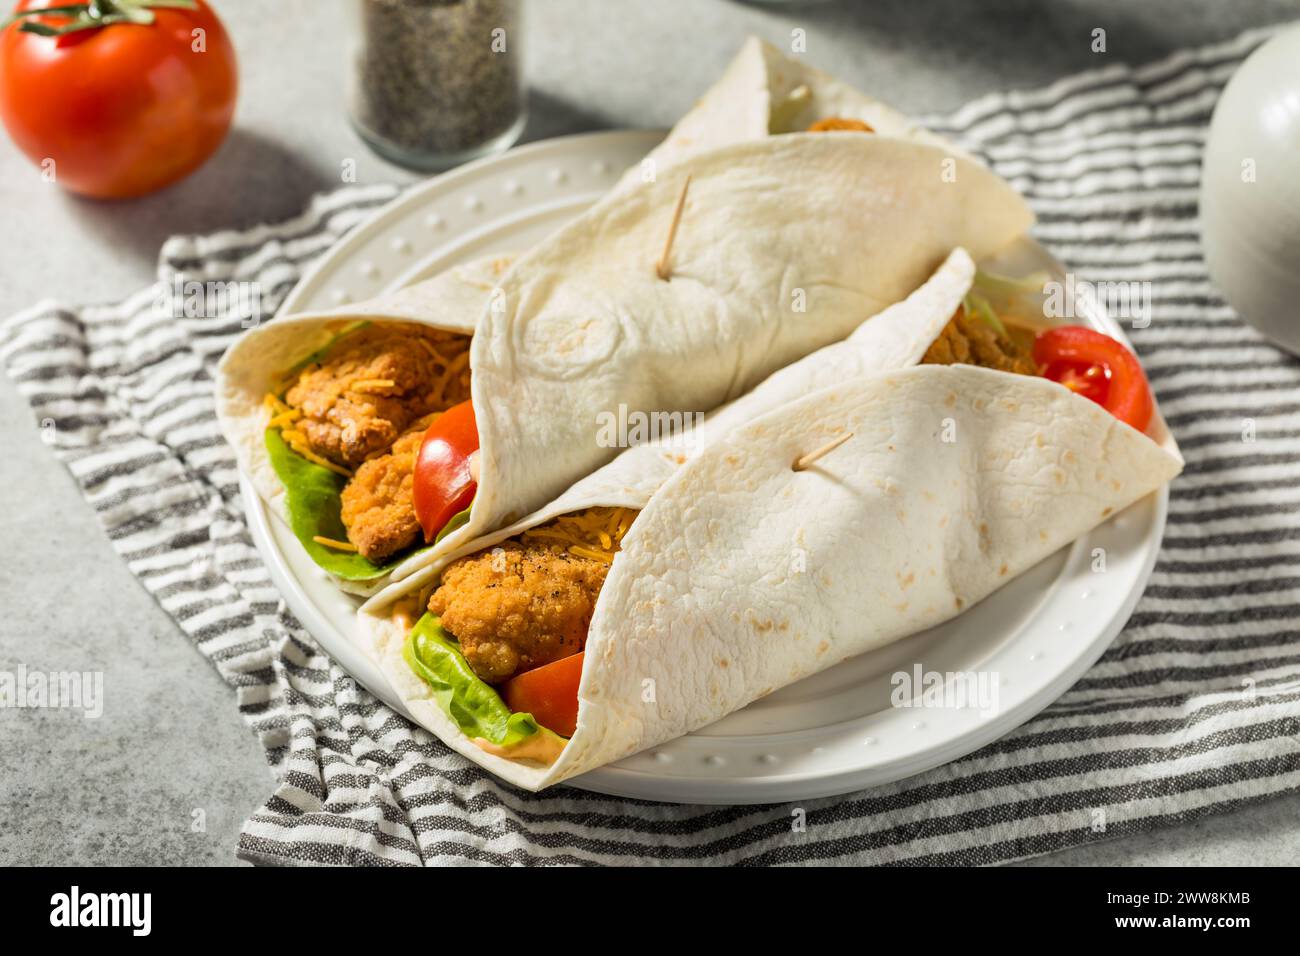 Healthy Homemade Fried Chicken Wrap with Tomato and Lettuce Stock Photo